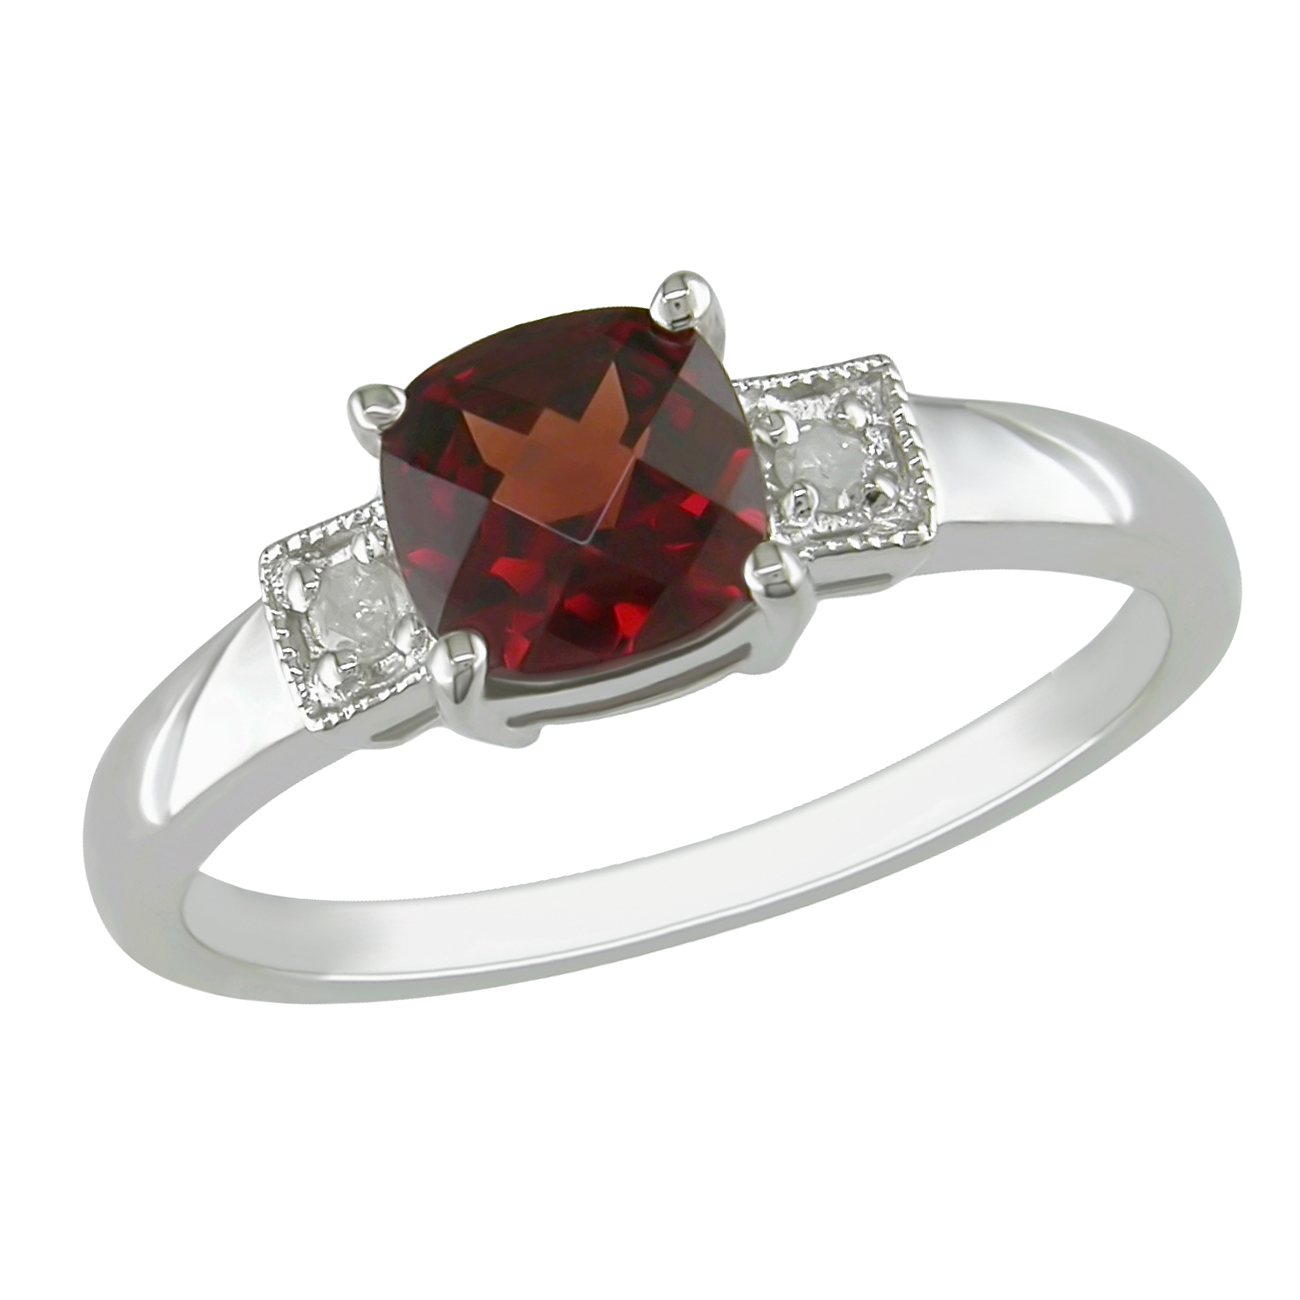 Amour 0.04 Carat T.W. Diamond and 1 1/3 Carat T.G.W. Garnet Fashion Ring in Sterling Silver I3